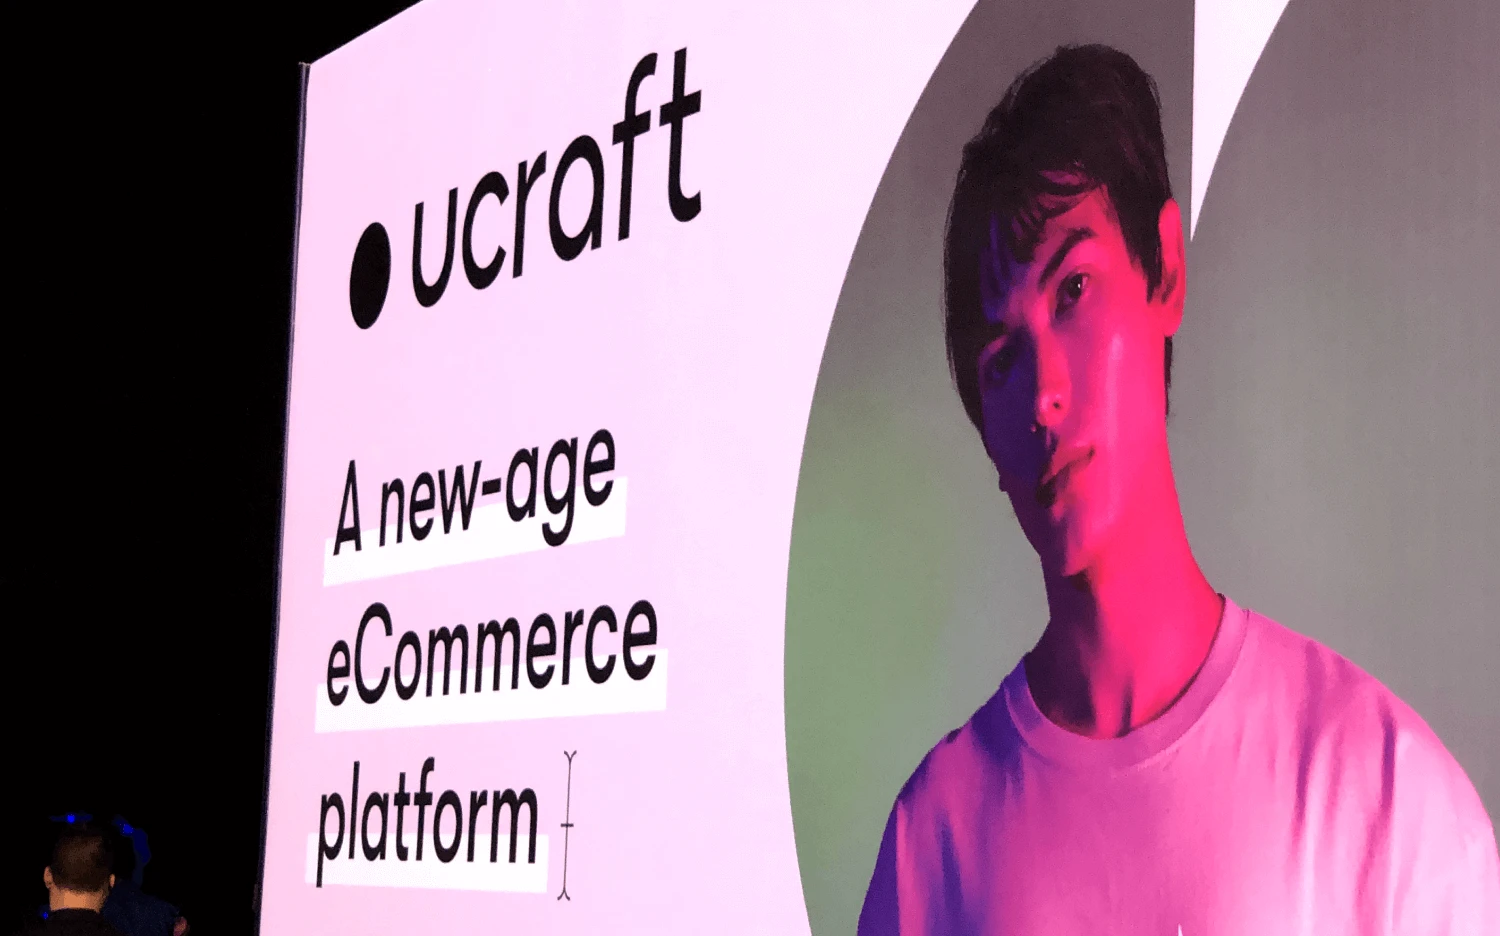 Ucraft Next is launched